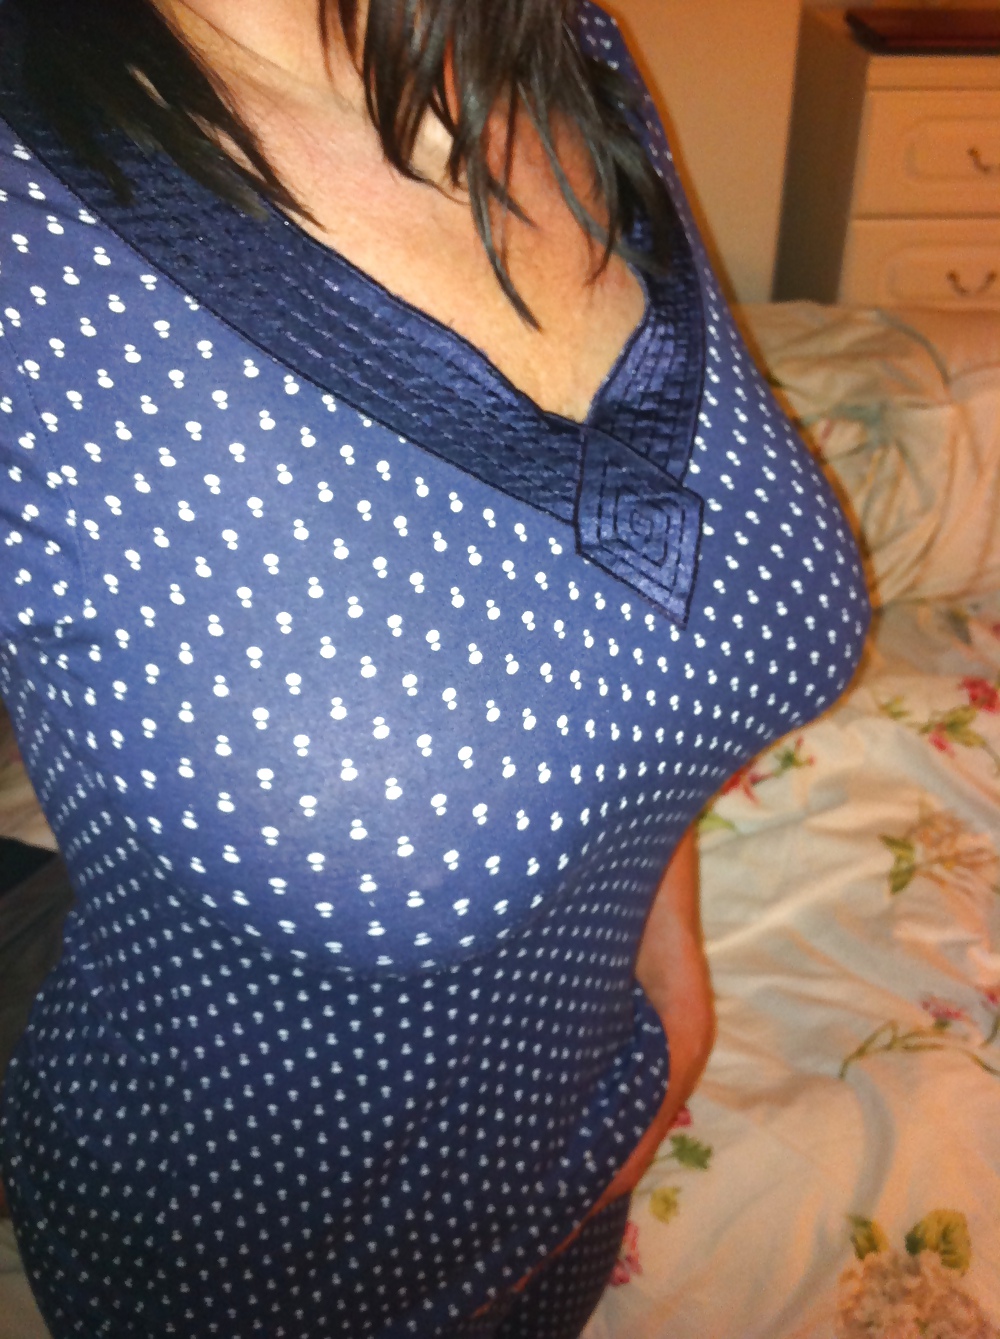 Gf,s sexy big tits ready for bed  #8639235